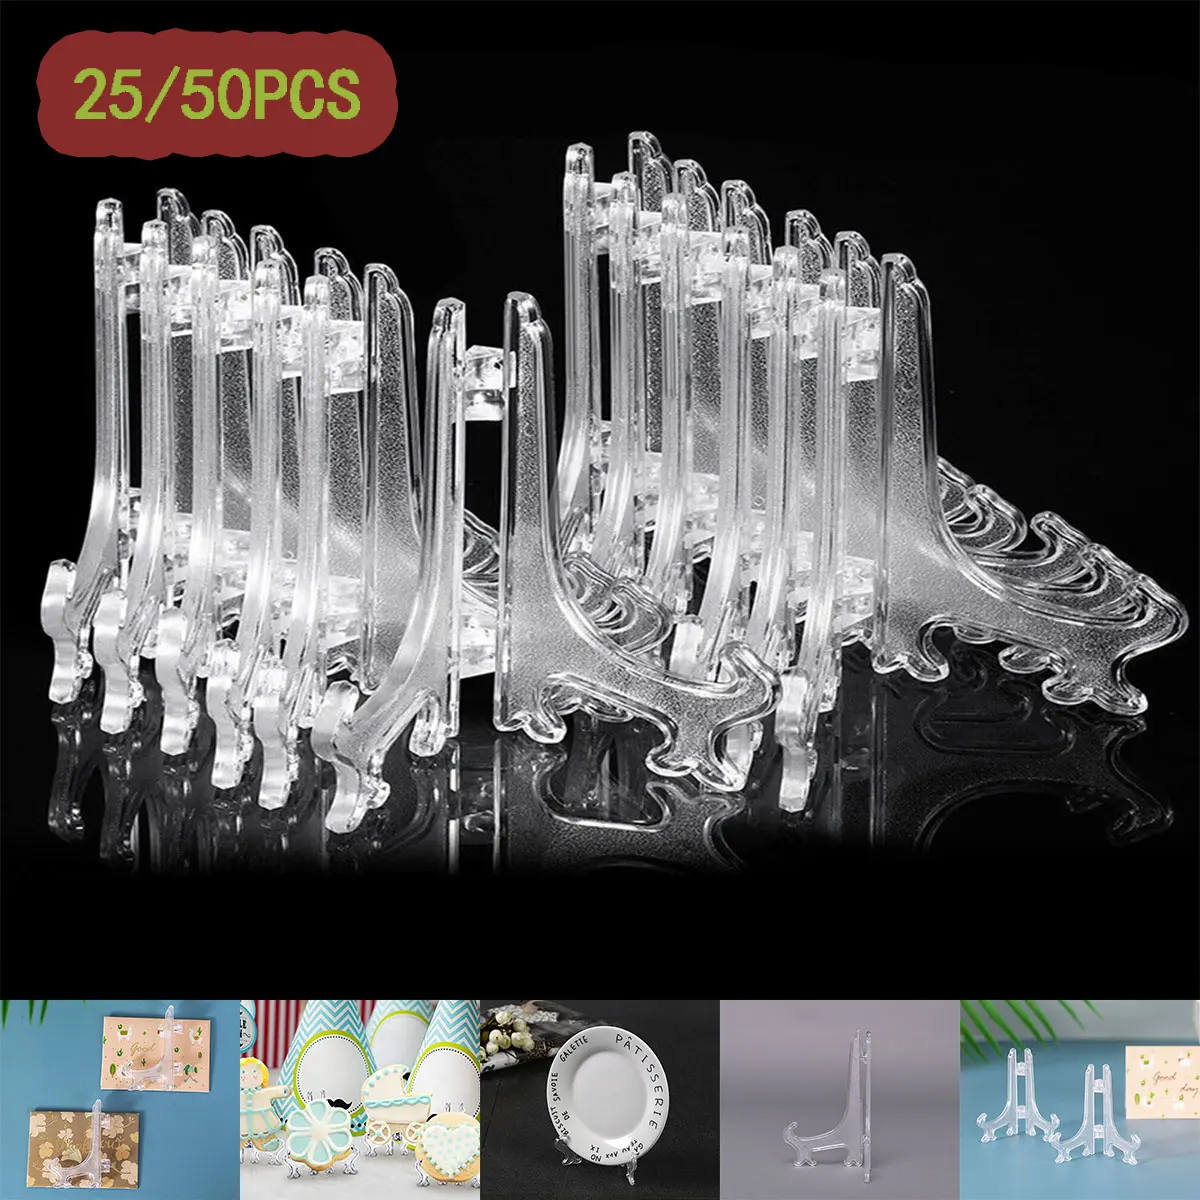 25/50Pcs Clear Plastic Easels or Stand/Plate Holders to Display Pictures or Other Items at Weddings, Home Decoration, Birthdays